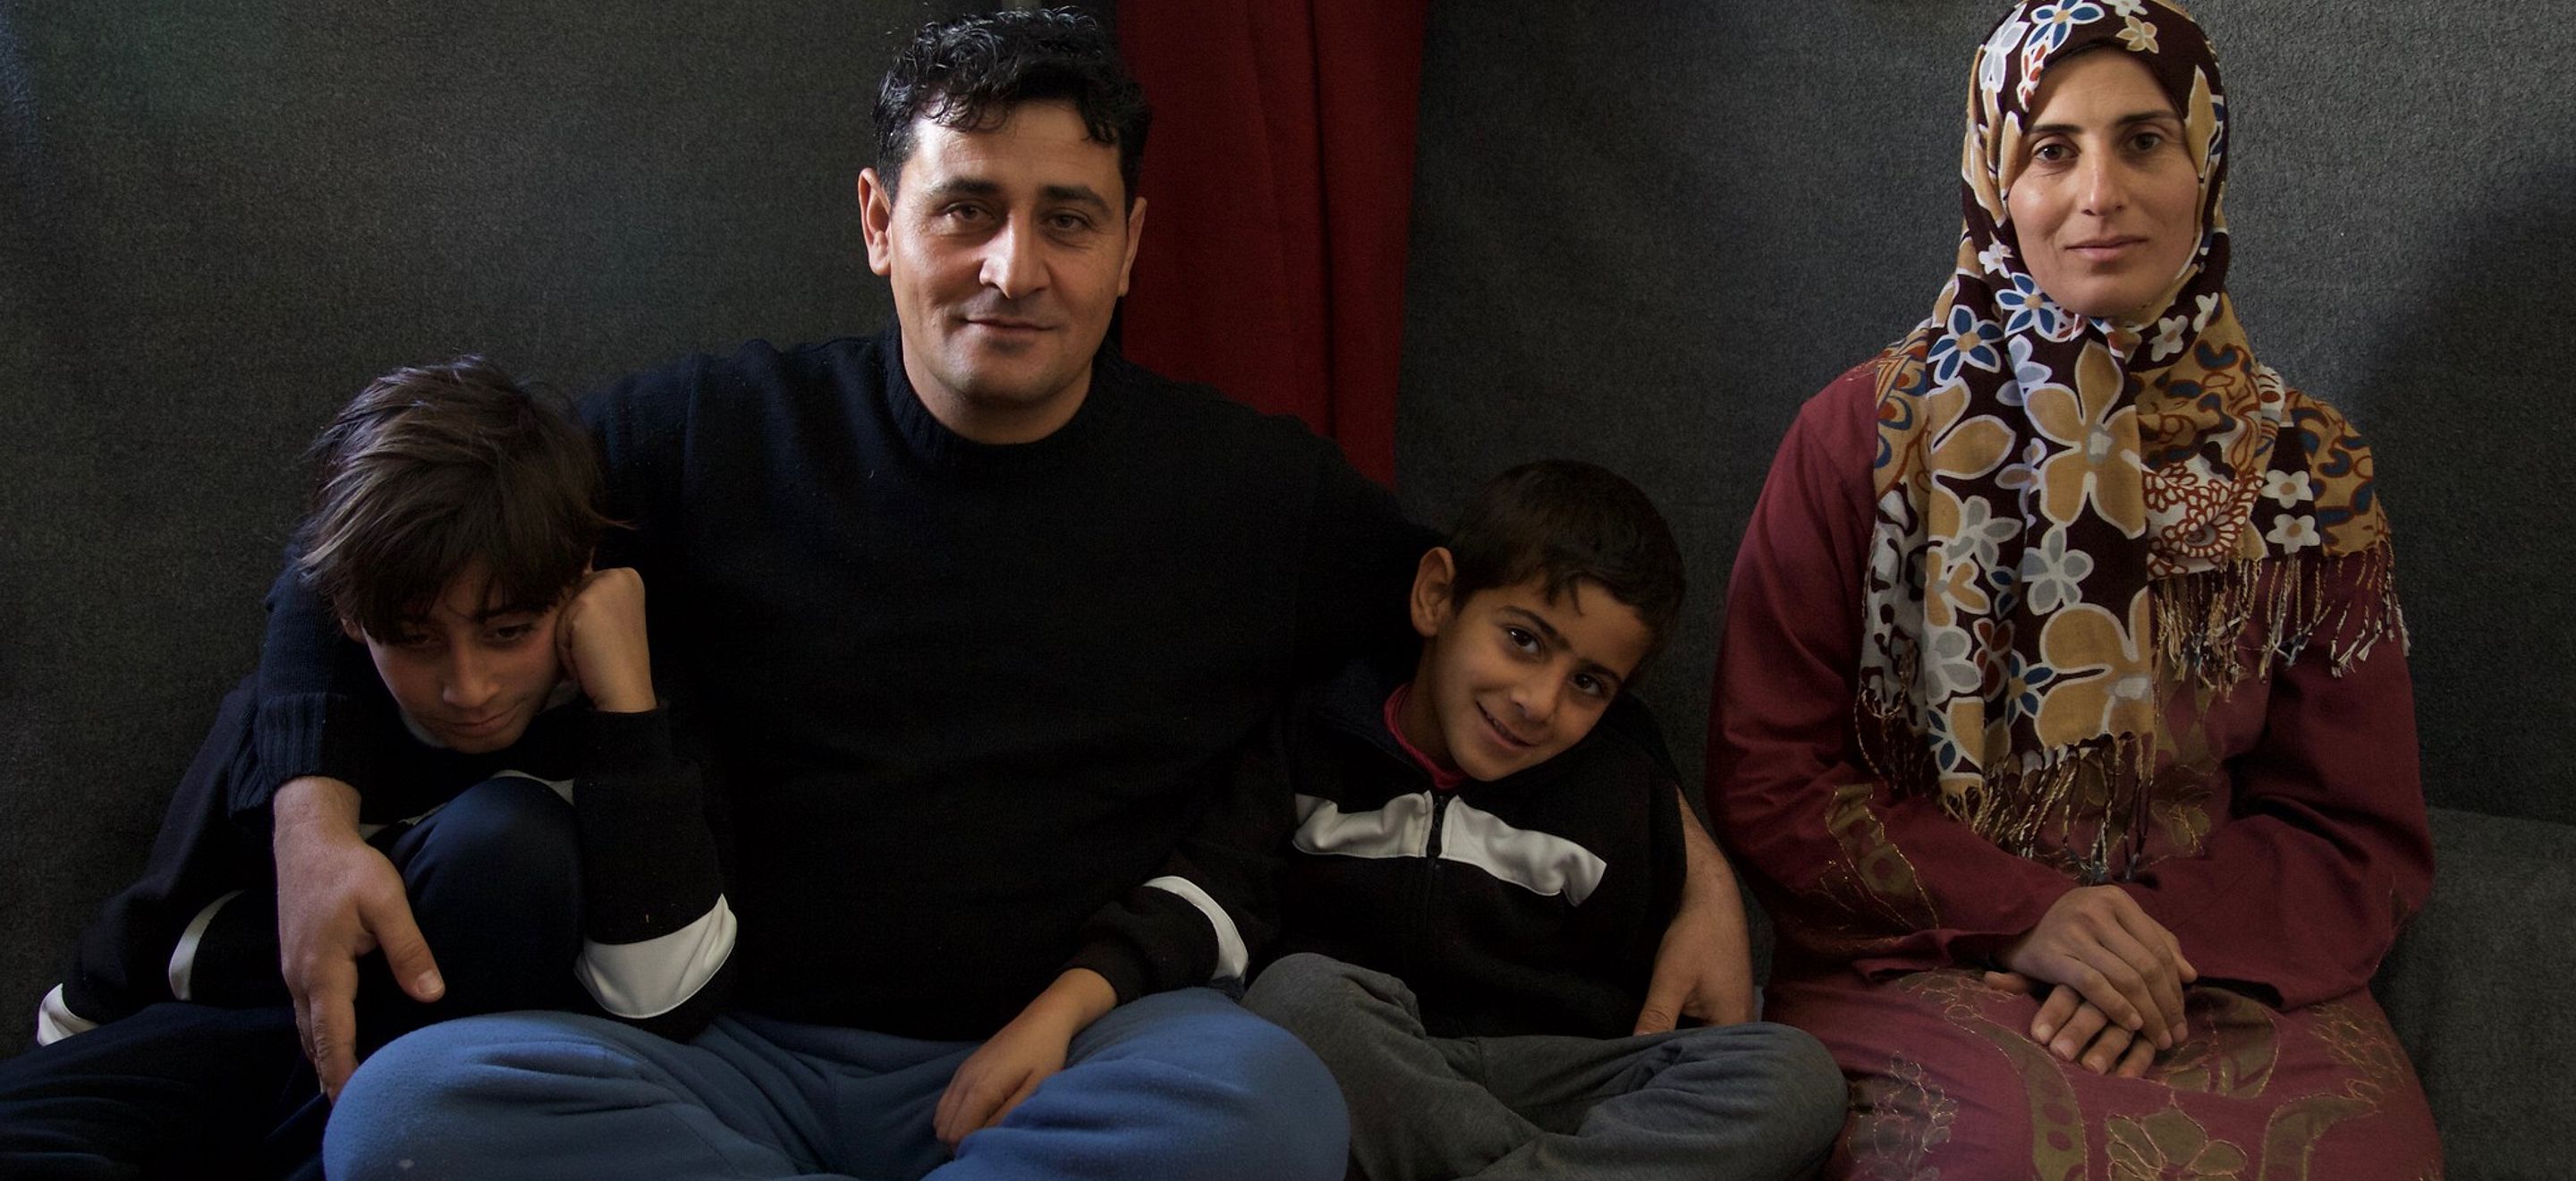 A family of four Syrian refugees - two young sons, a father, and a mother - sit on cushions on the floor.